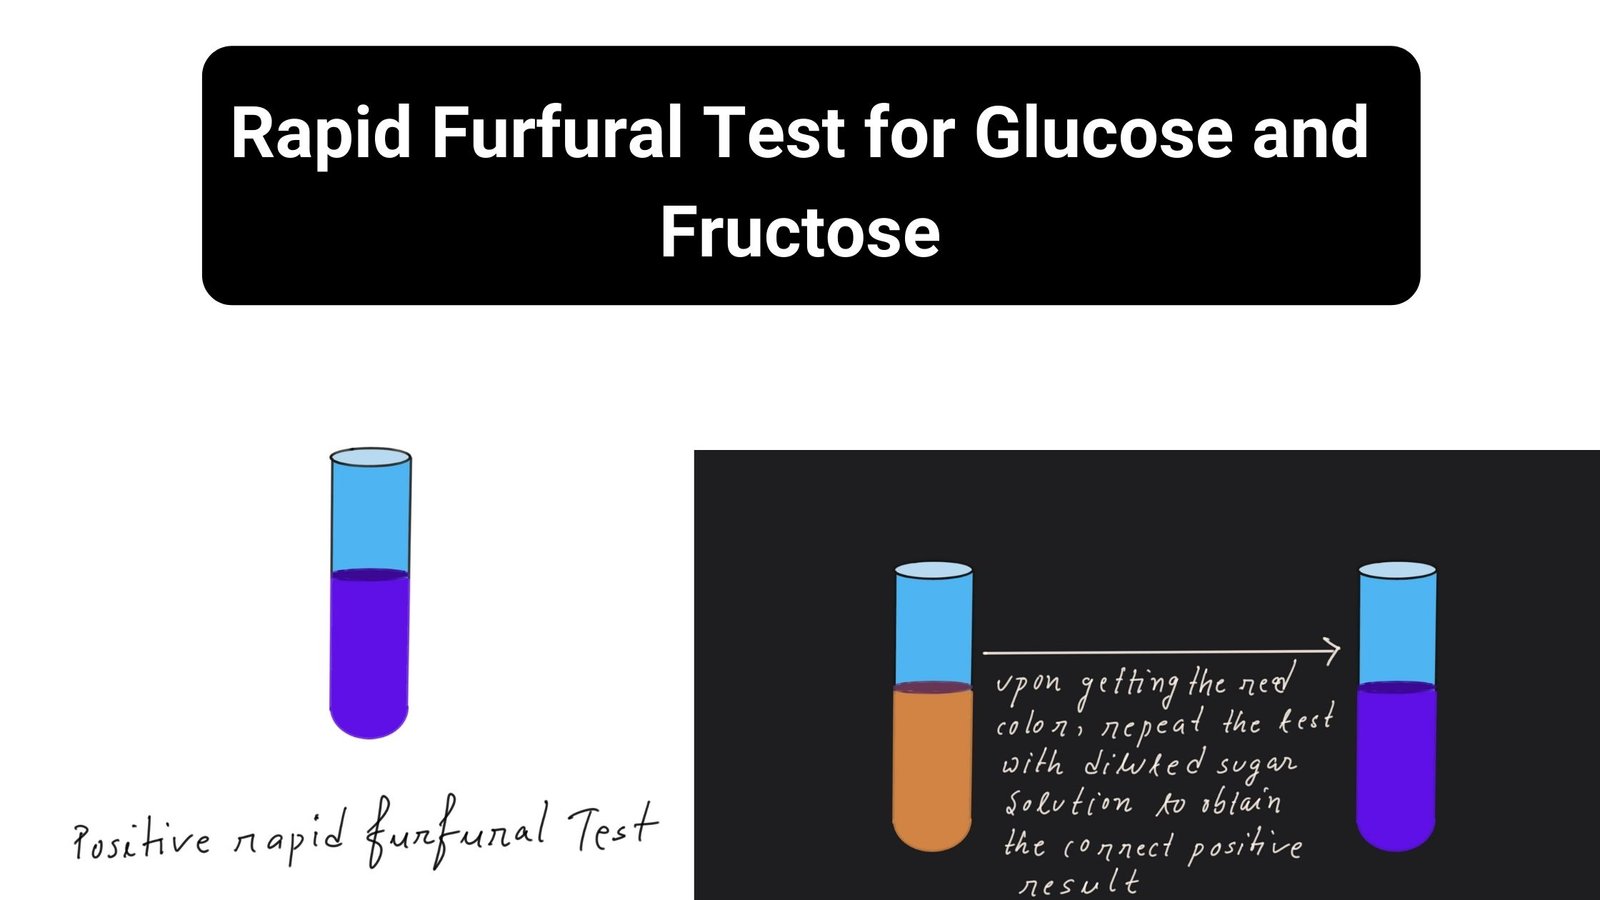 Rapid Furfural Test for Glucose and Fructose